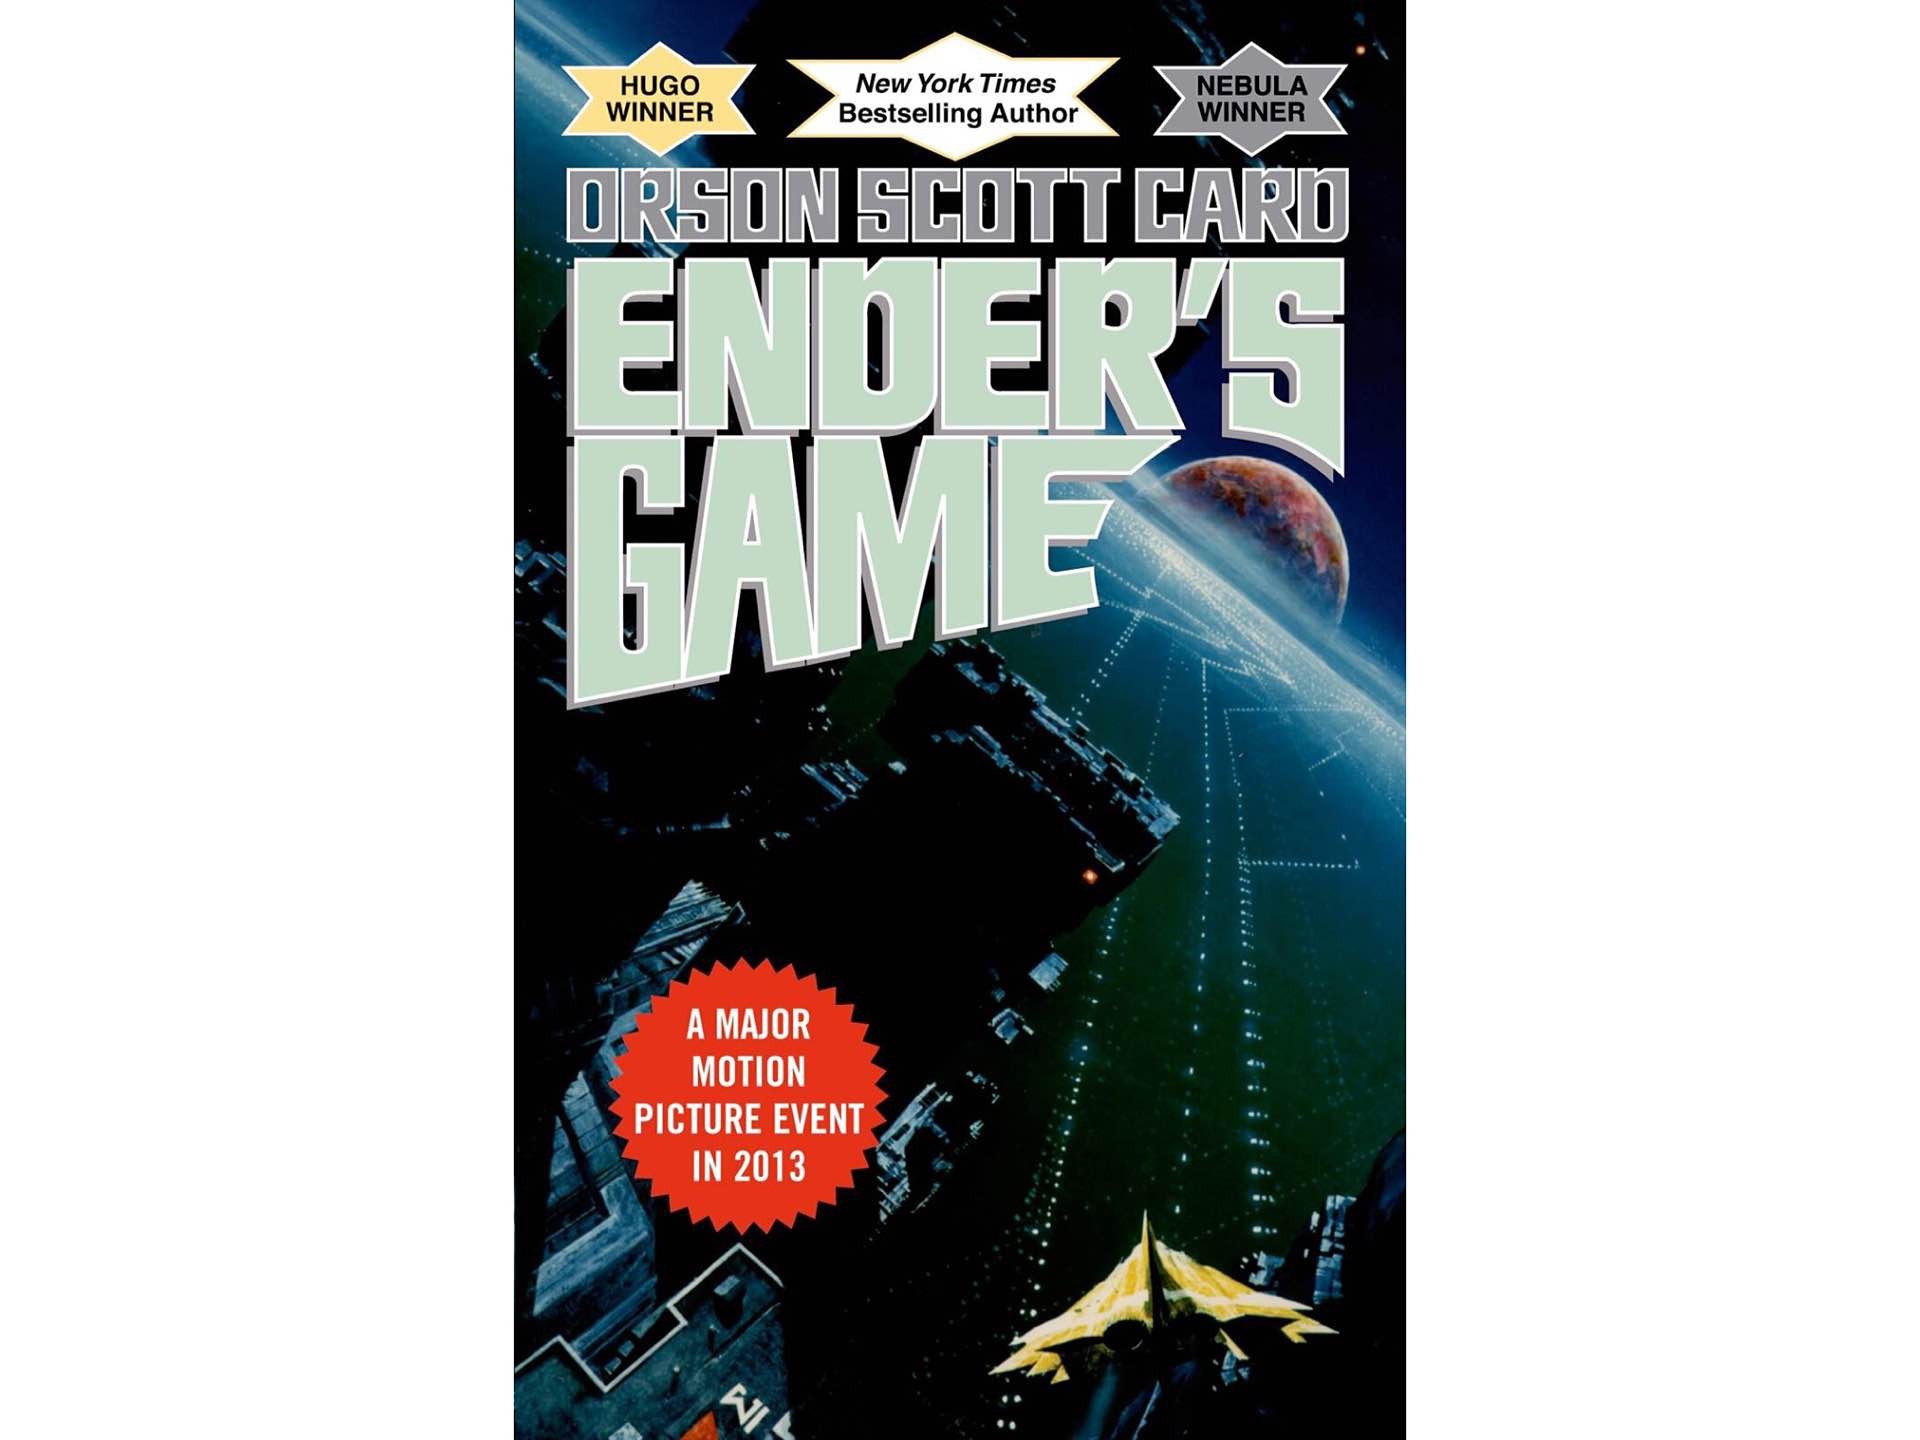 Ender's Game by Orson Scott Card.